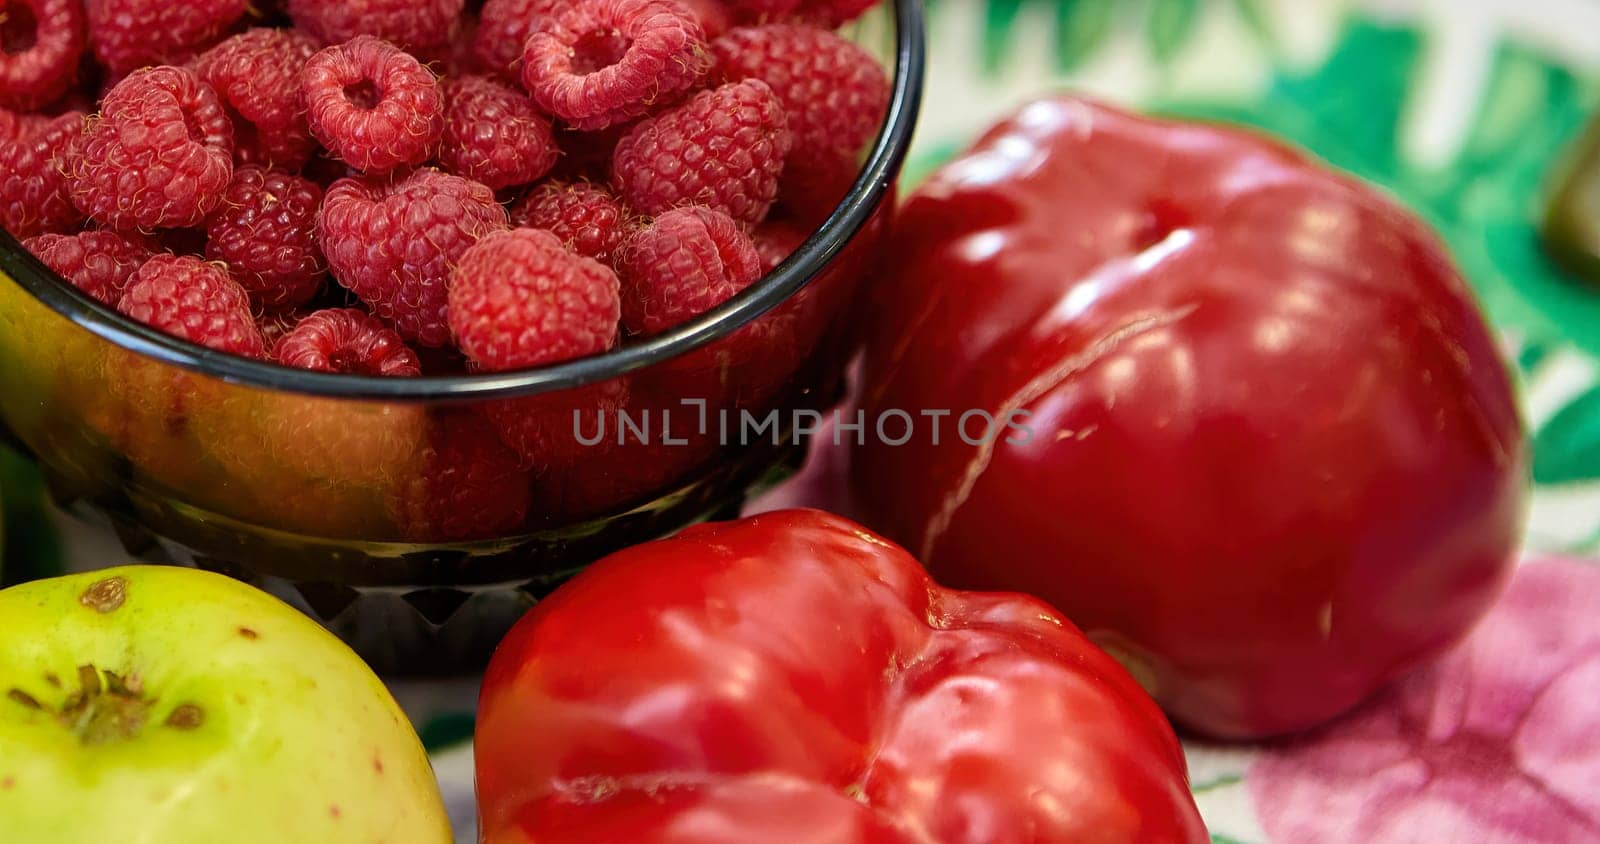 Variety of fresh raw organic fruits and vegetables. Raspberries, apples with tomatoes and red peppers on the table.